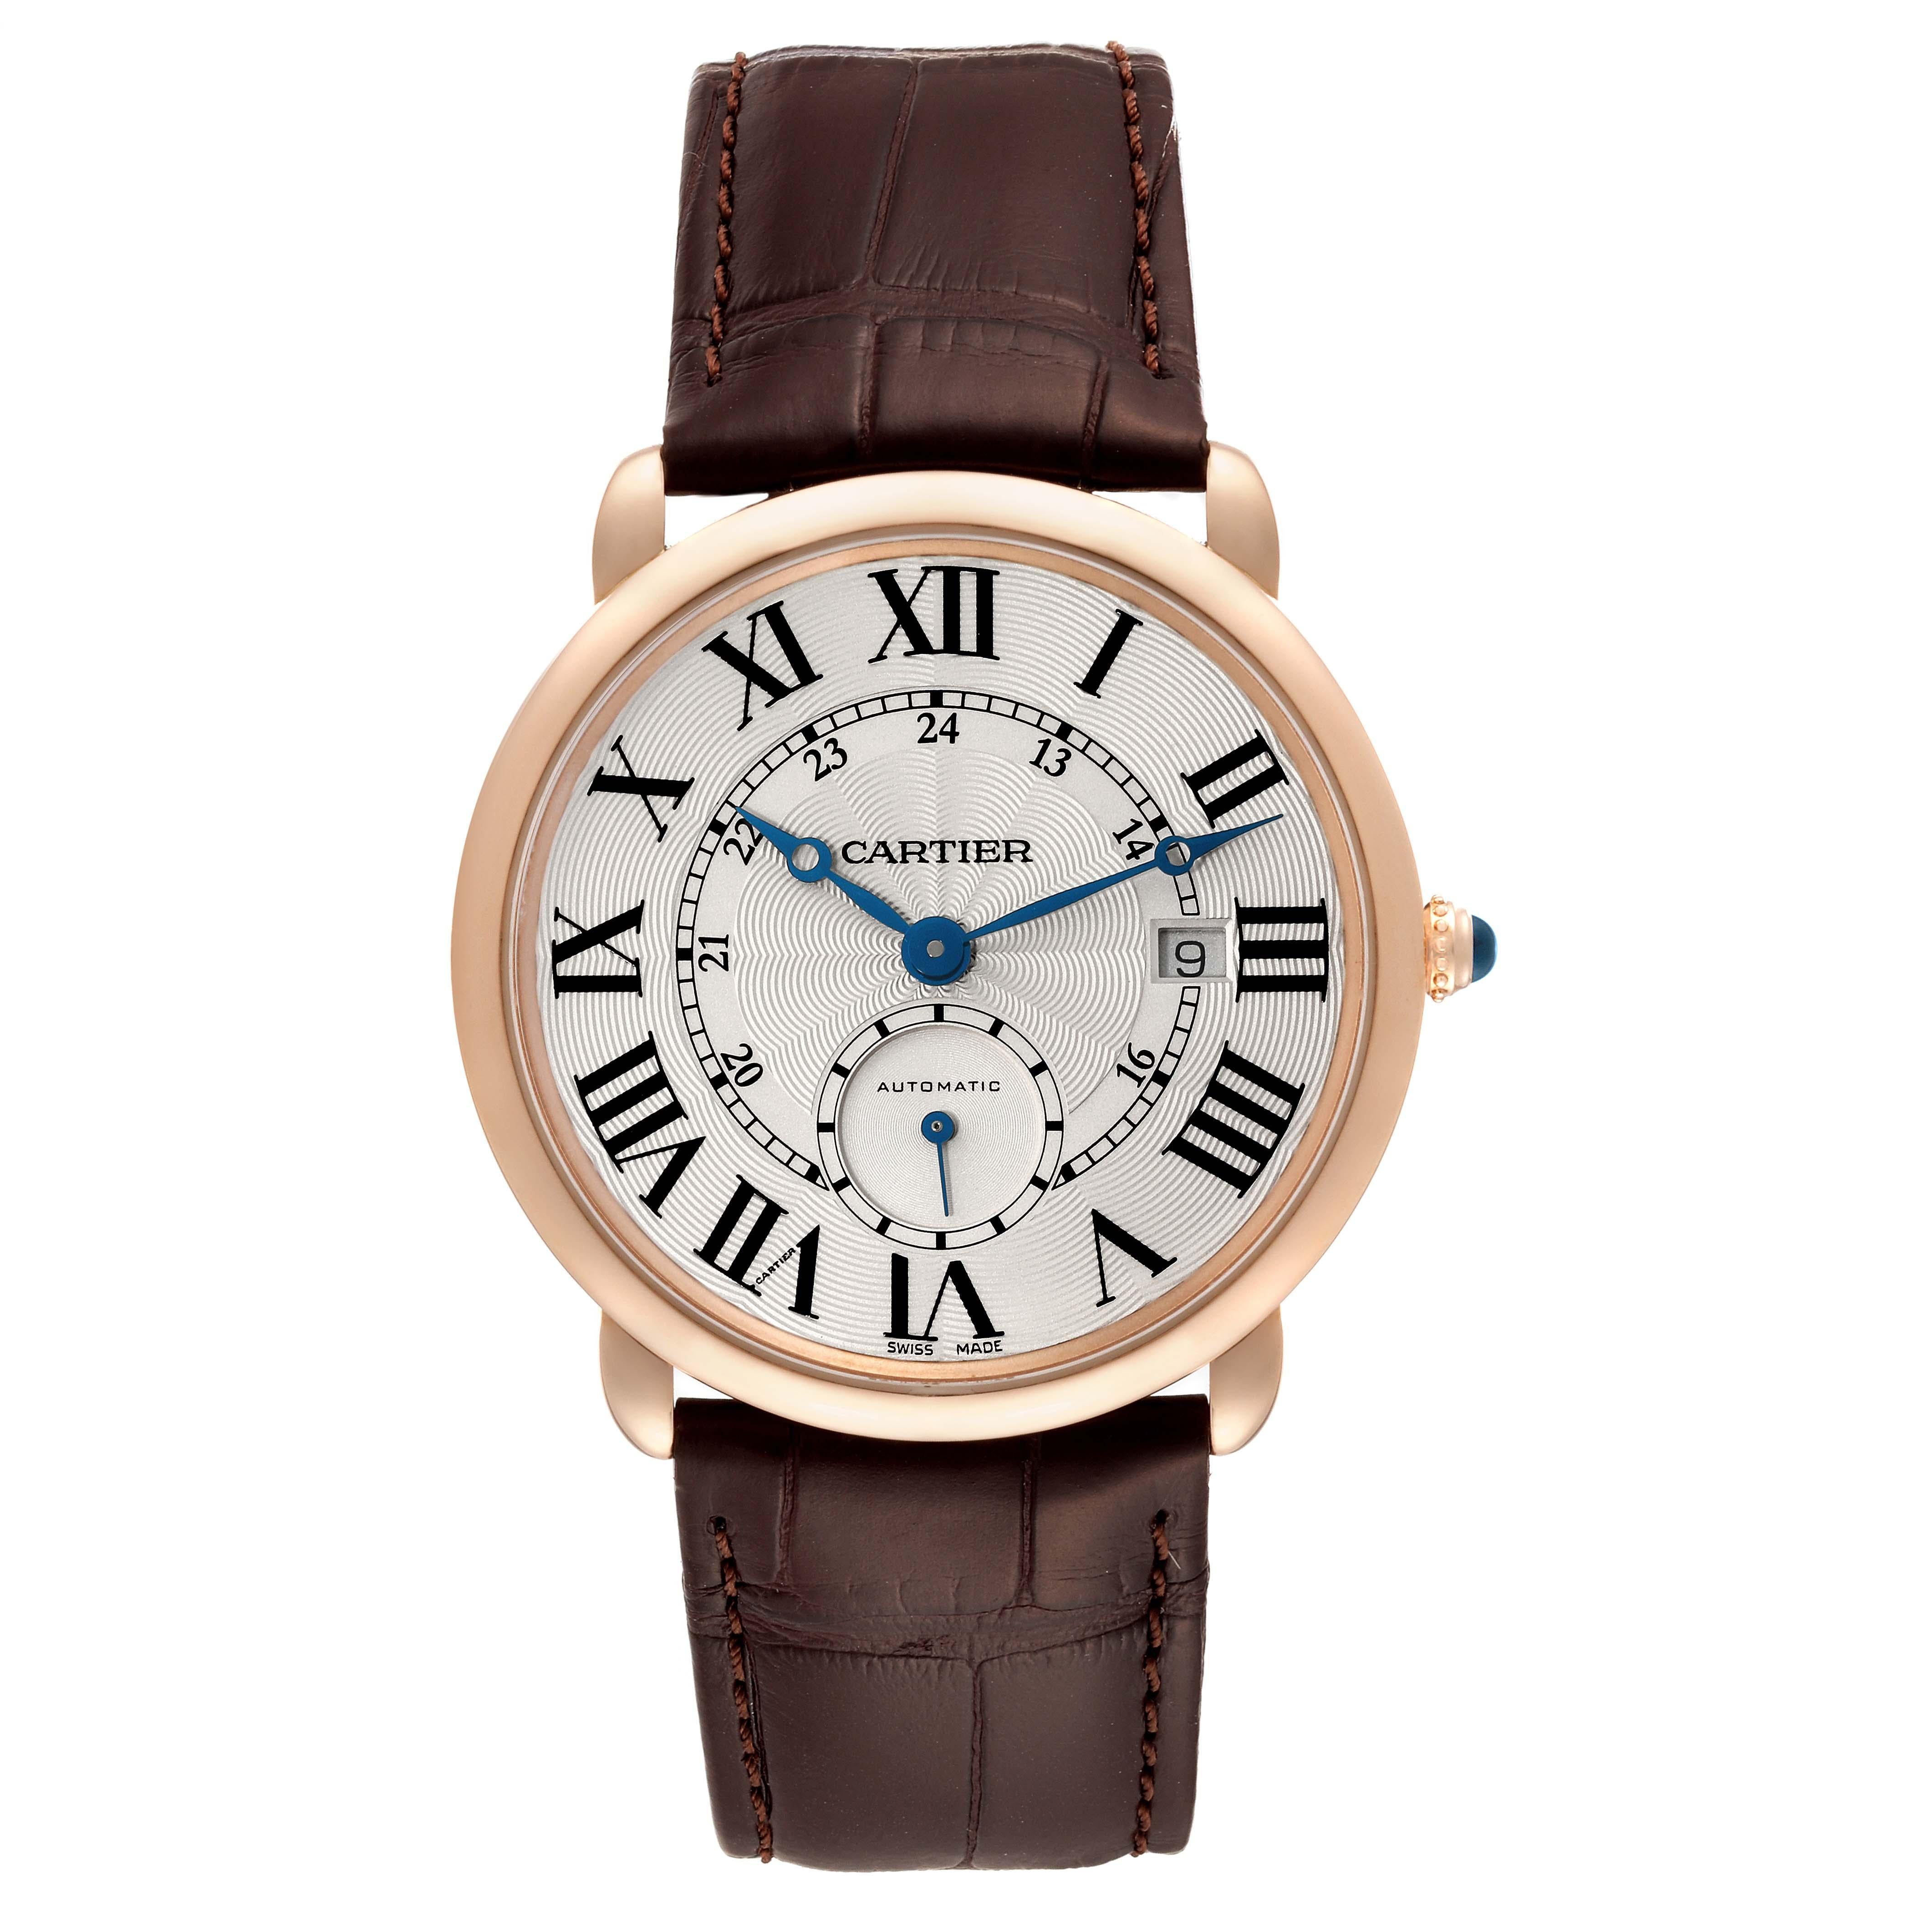 Cartier Ronde Louis Rose Gold Silver Dial Automatic Mens Watch W6801005. Automatic self-winding movement. 18k rose gold case 40.0 mm in diameter. Transparent exhibition sapphire crystal caseback. Circular grained crown set with the blue sapphire